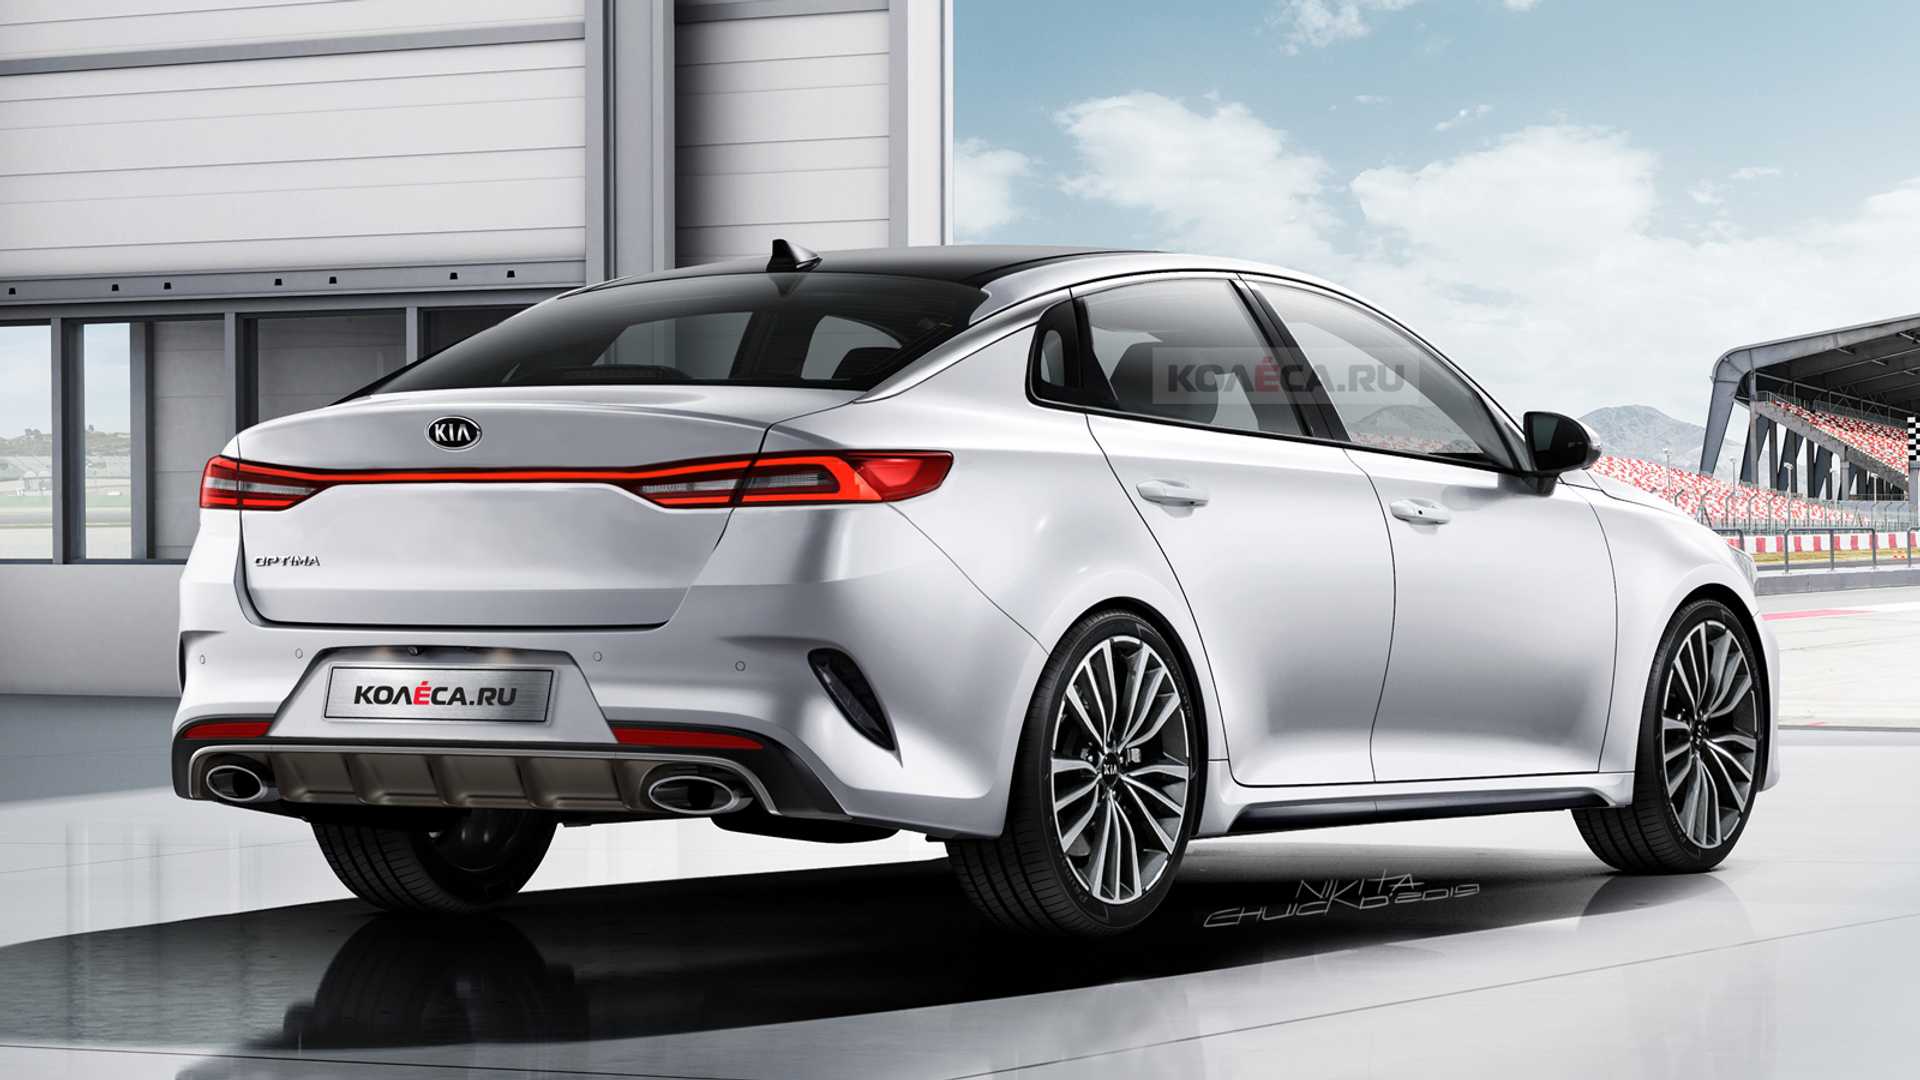 2021 Kia Optima Could Look More Conventional Than Sonata, Which Is a ...